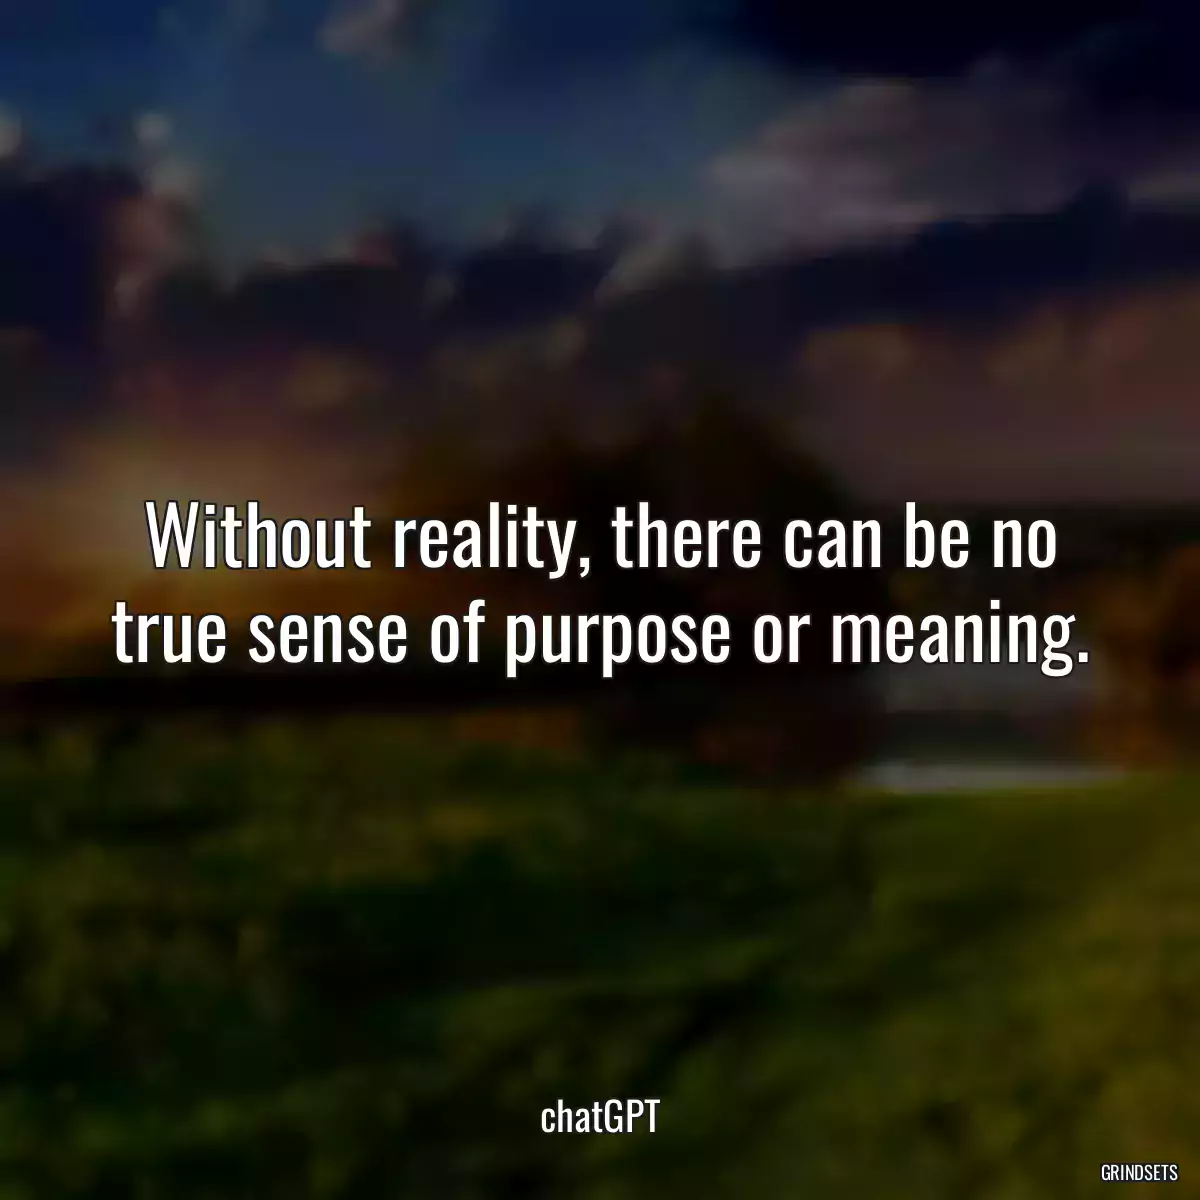 Without reality, there can be no true sense of purpose or meaning.